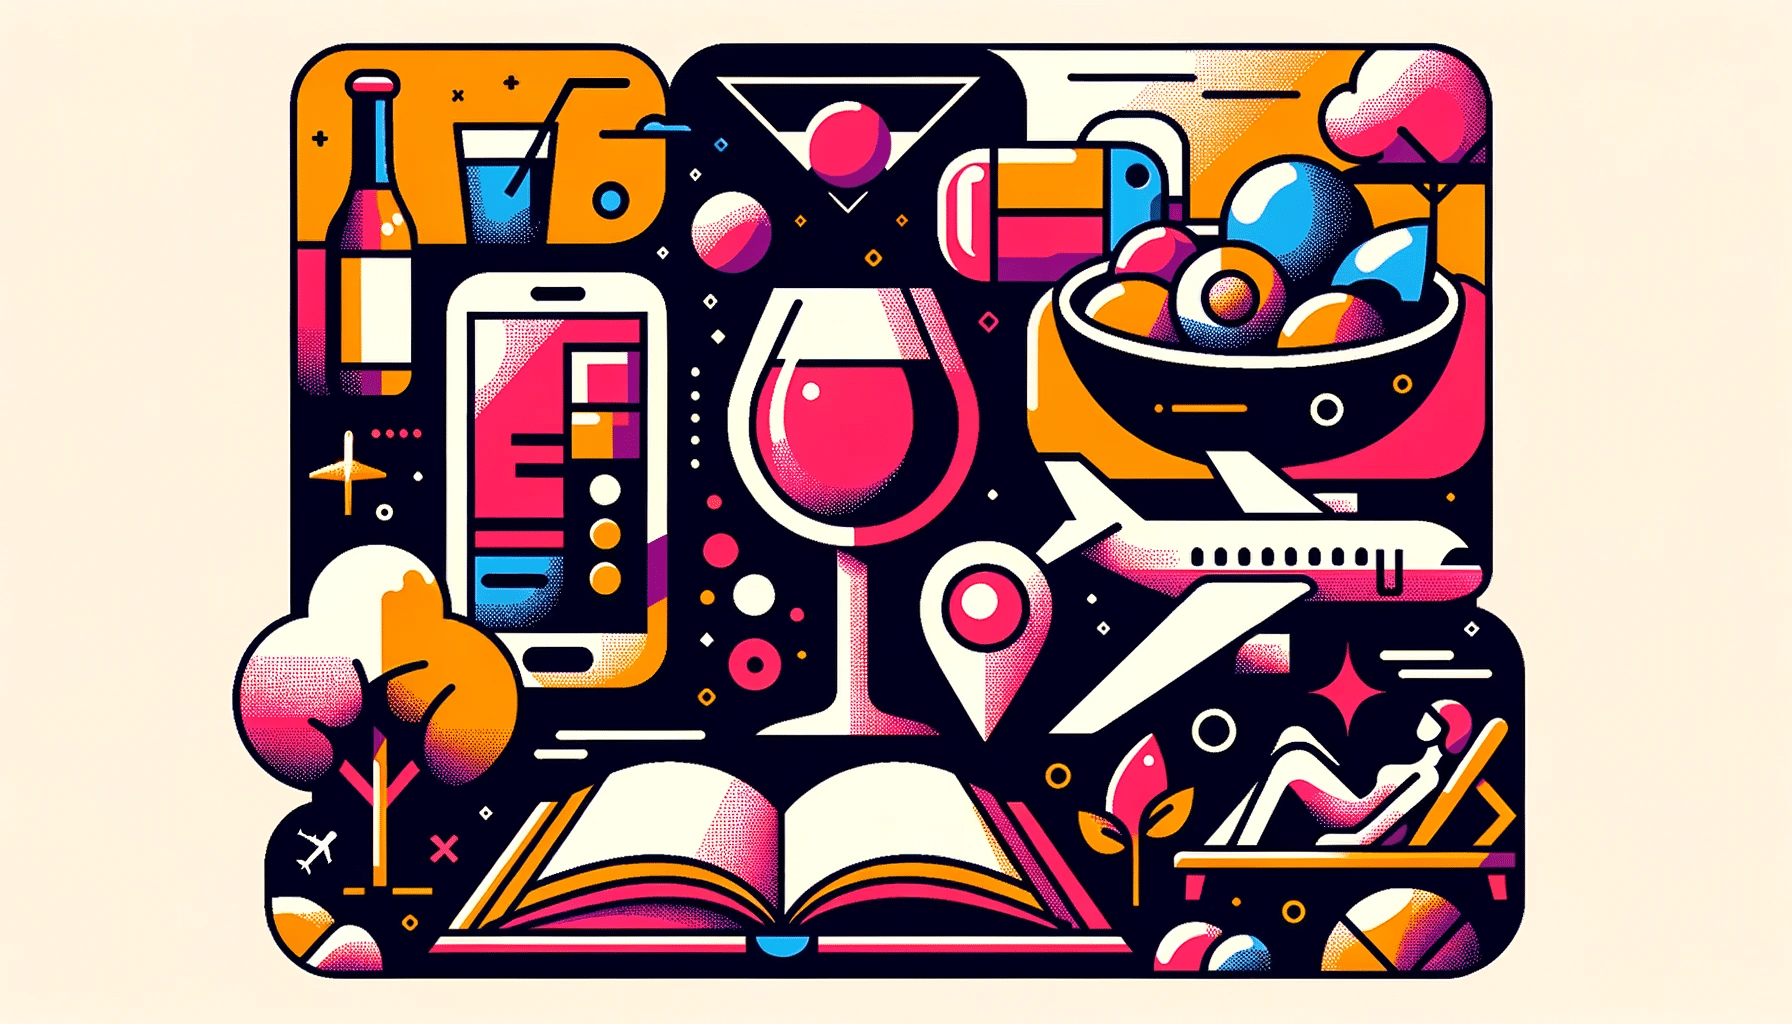 Stylized illustration using bold and contrasting colors on a 16_9 canvas. A sleek gadget outline stands for consumer tech. A dish with various food it